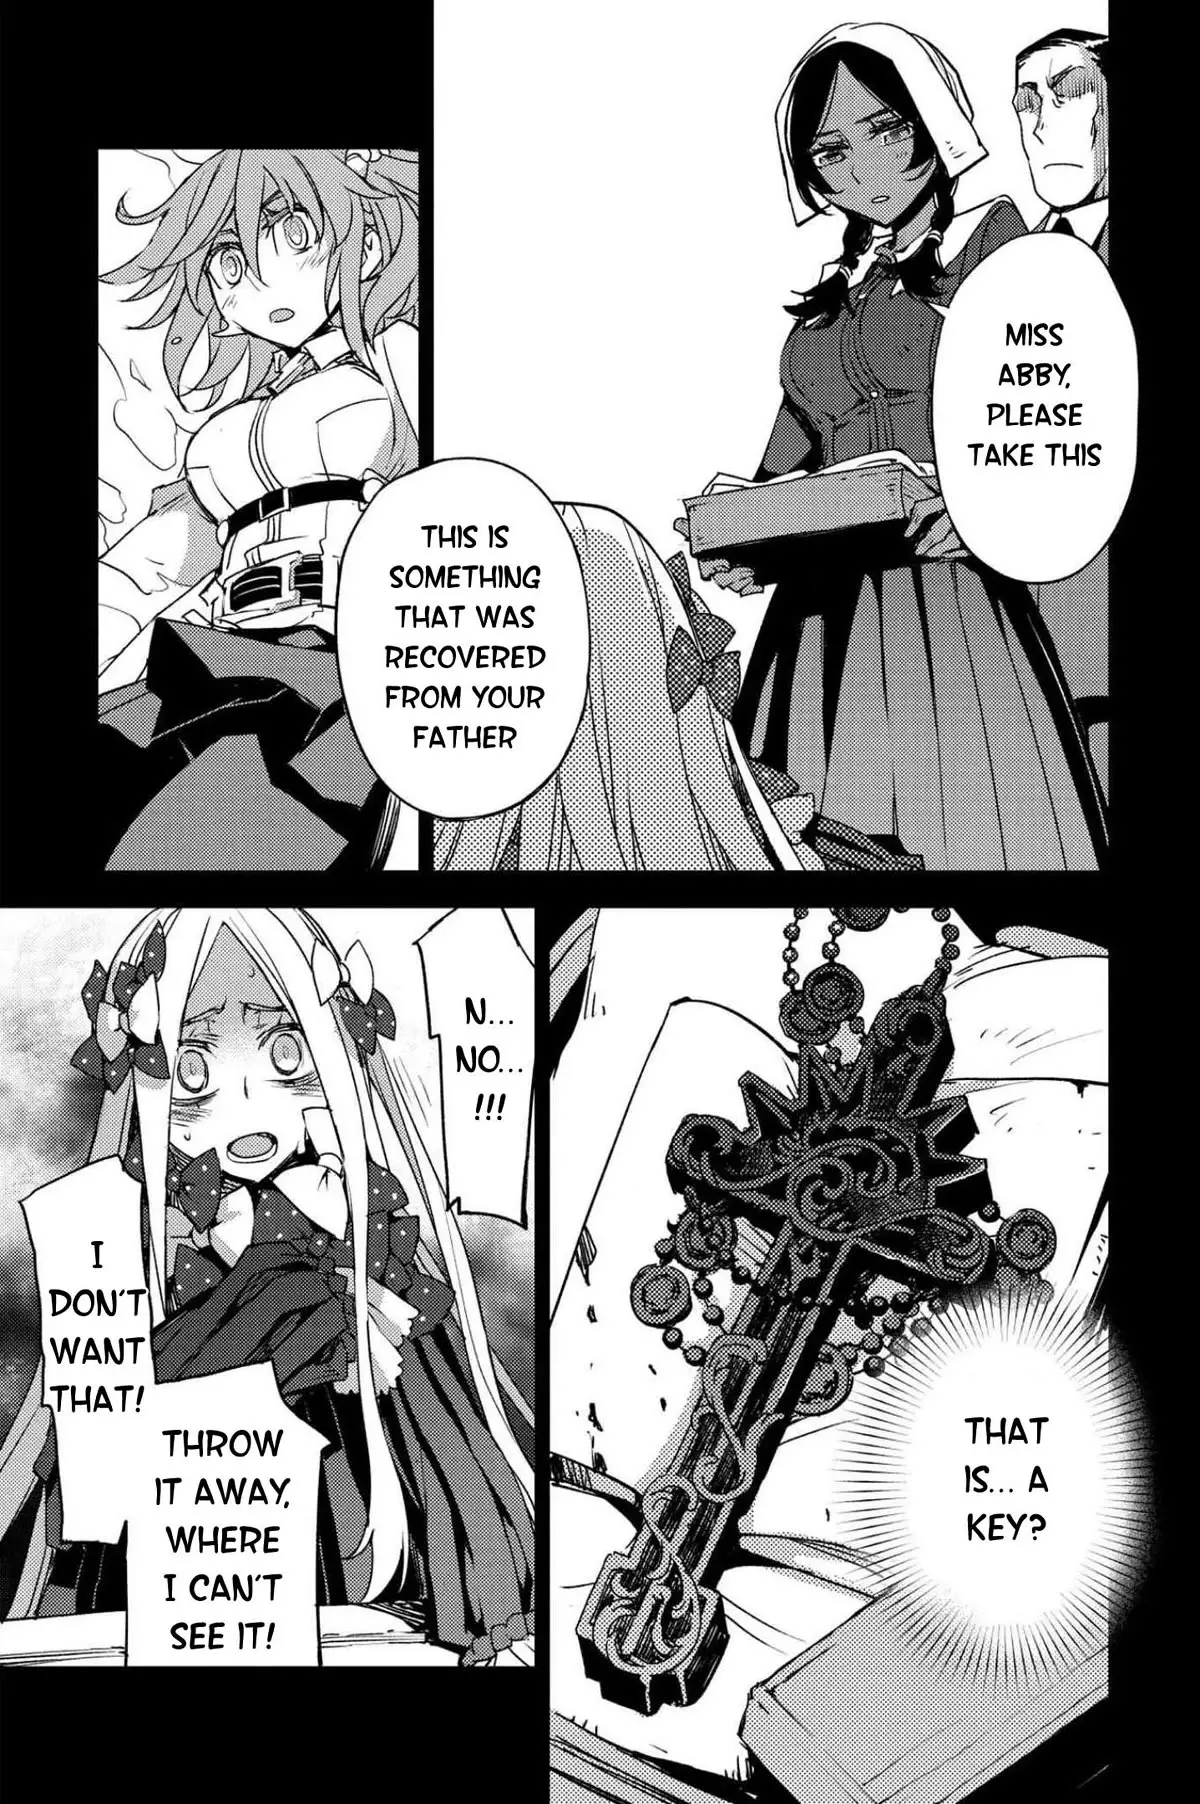 Fate/grand Order: Epic Of Remnant - Subspecies Singularity Iv: Taboo Advent Salem: Salem Of Heresy - 26 page 19-2b6ff052